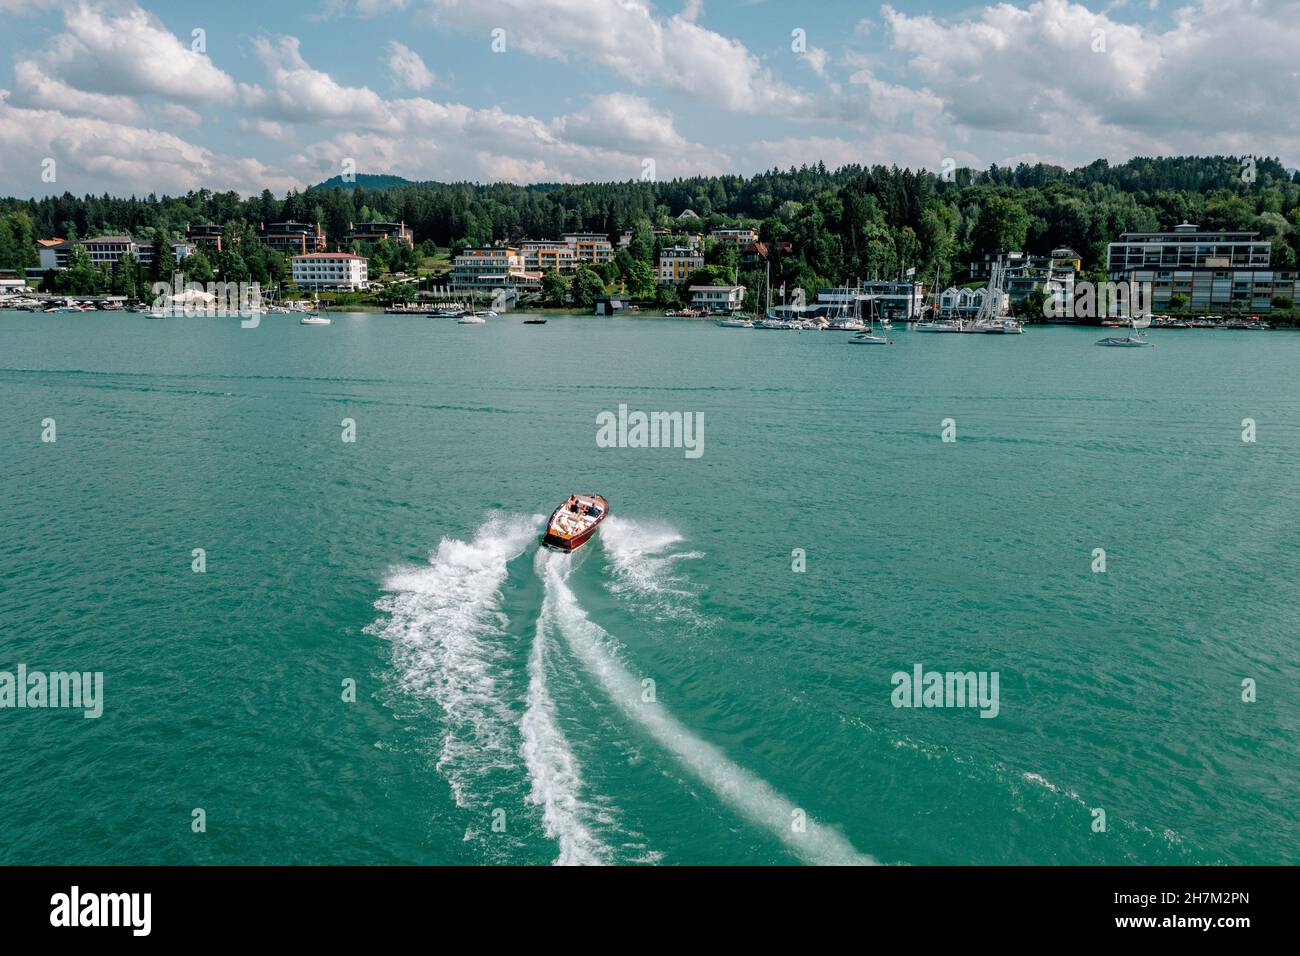 Austria, Carinthia, Velden am Worther See, Aerial view of motorboat leaving wake across turquoise waters of Worthersee lake Stock Photo